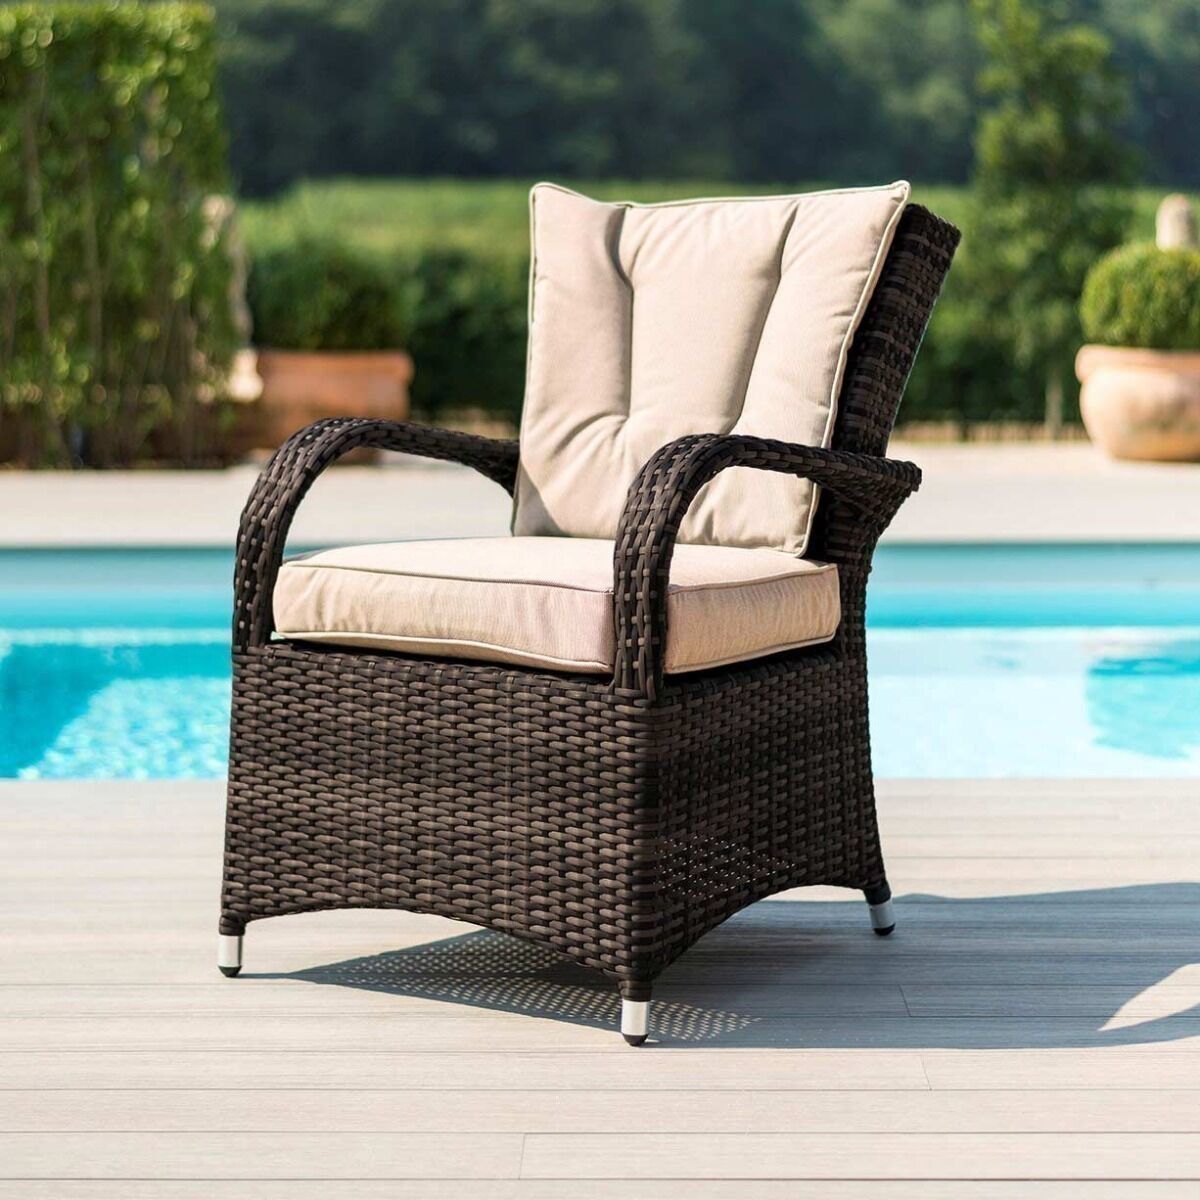 Maze - Texas 6 Seat Round Rattan Dining Set with Ice Bucket & Lazy Susan - Brown product image